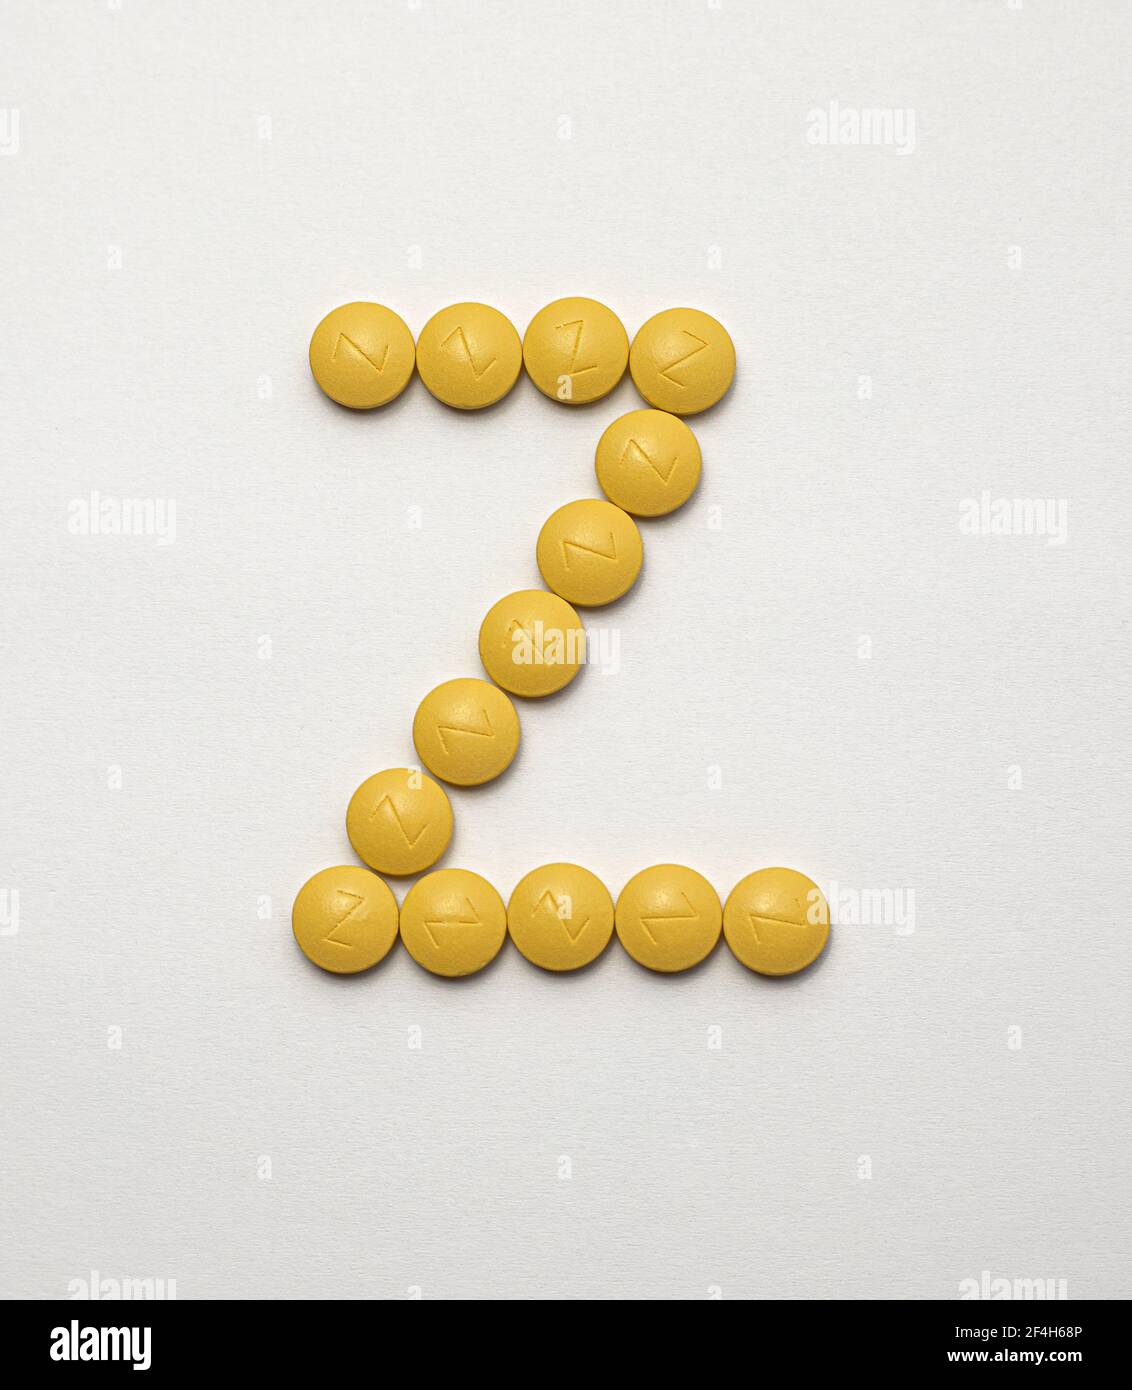 Iron in yellow tablets arranged in the letter Z on a white background Stock Photo